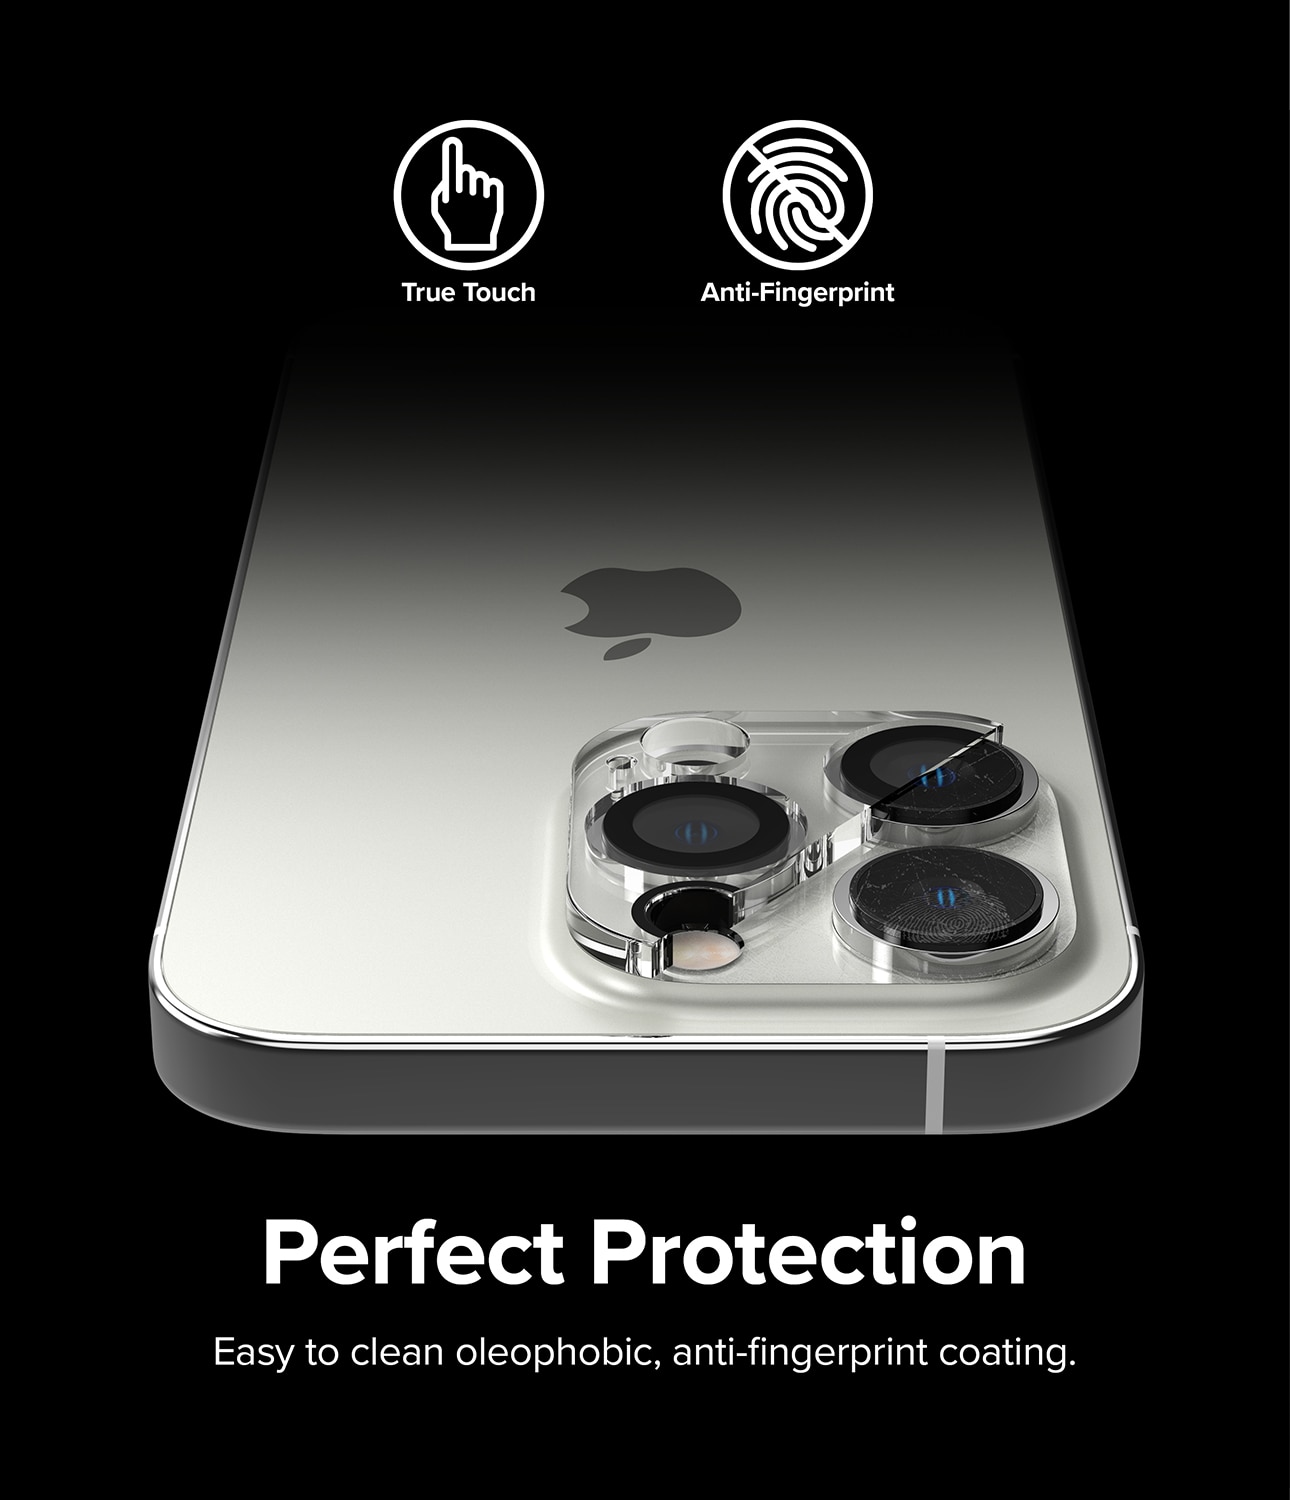 Camera Protector Glass iPhone 14 Pro (2-pack)